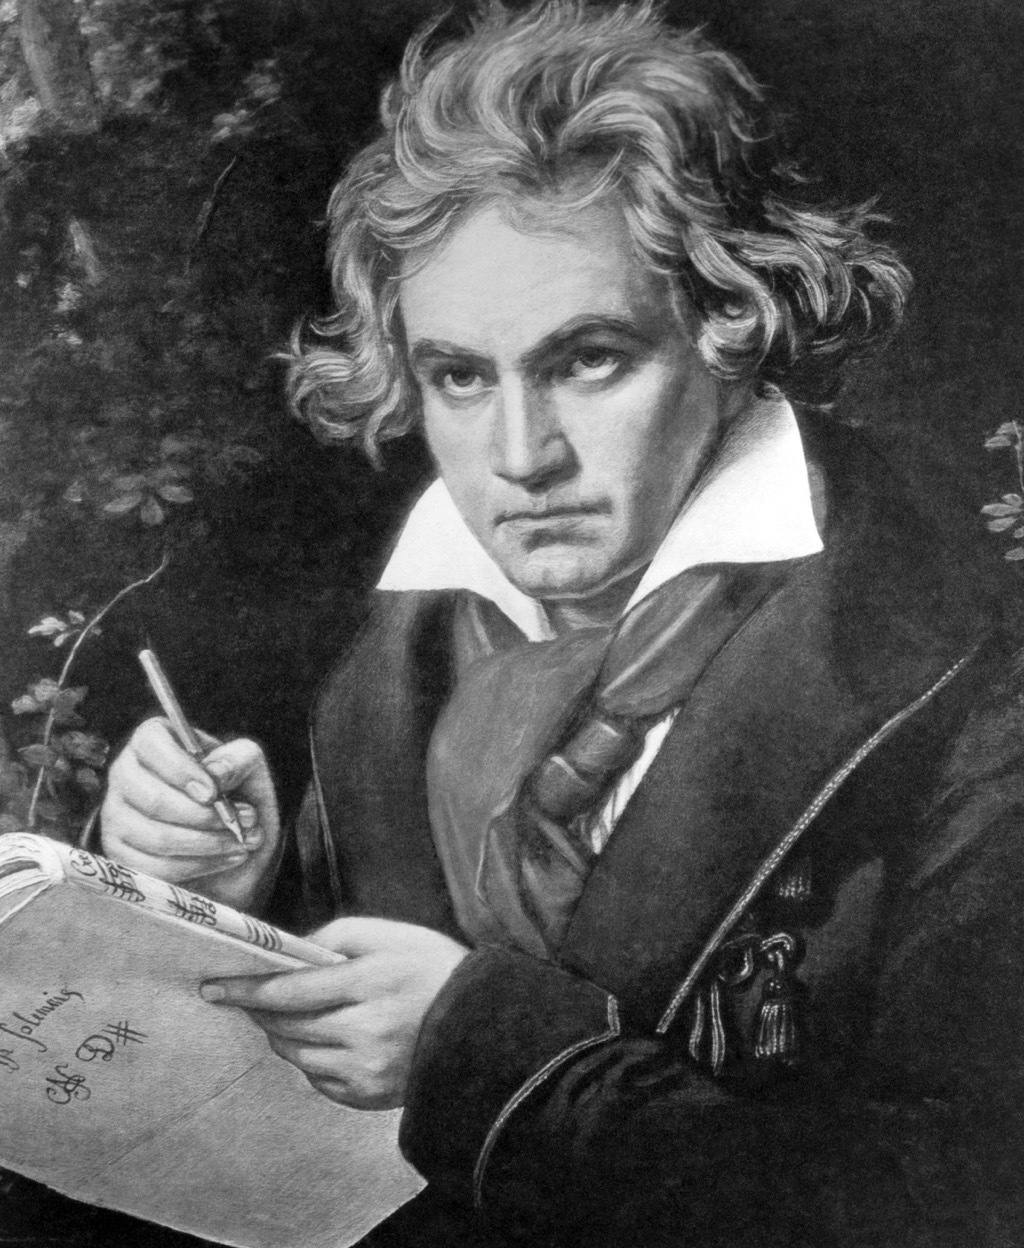 Beethoven, who had a witty put-down